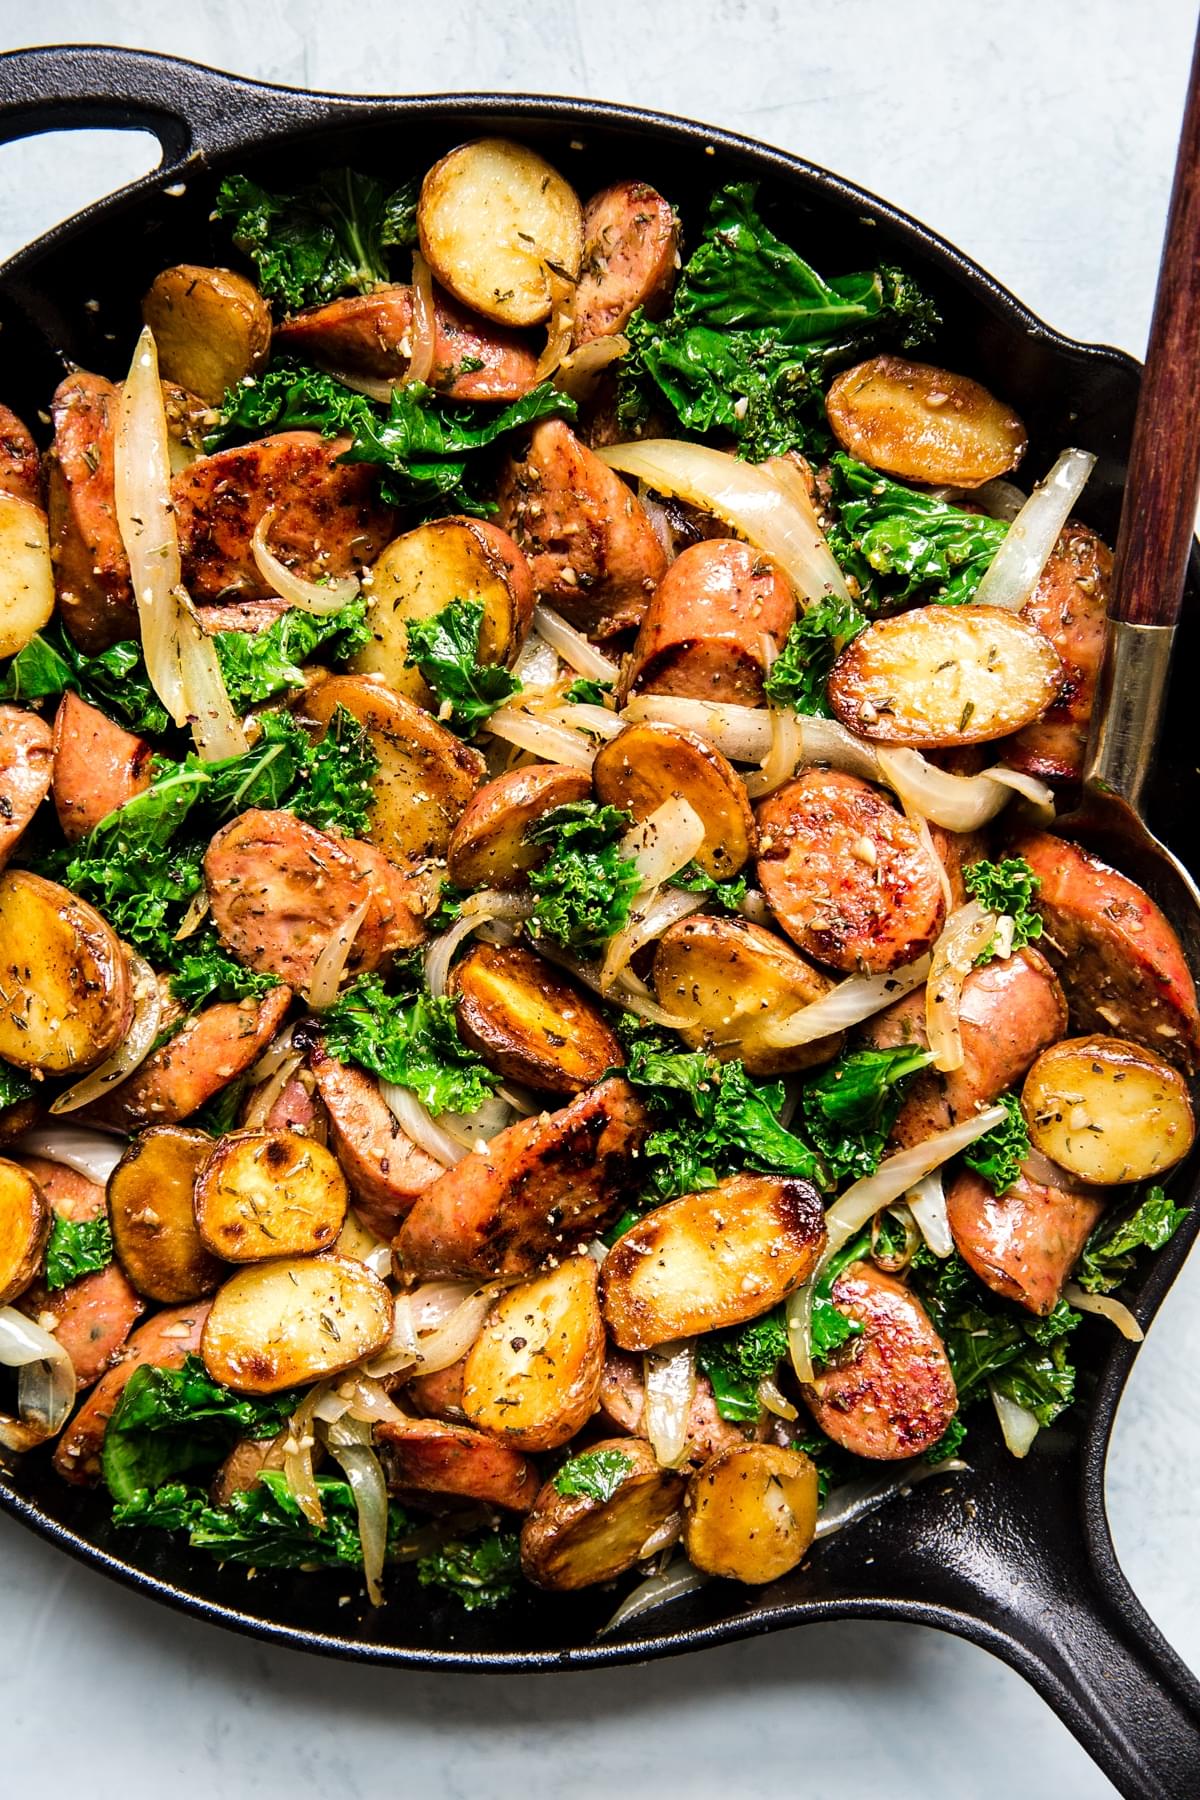 Sausage kale and potato skillet dinner in a cast iron skillet